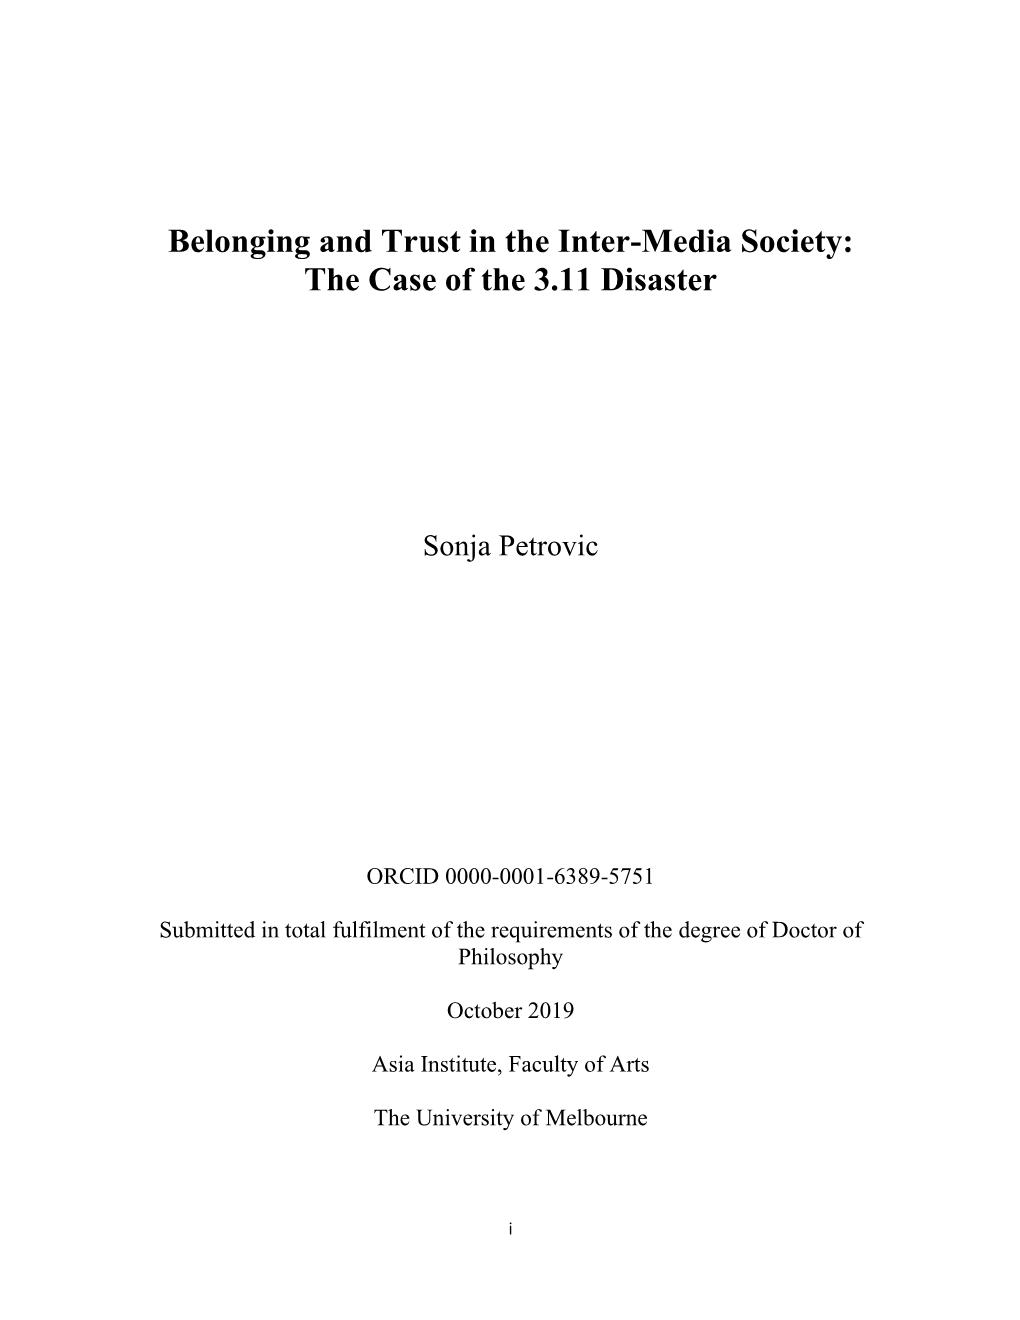 Belonging and Trust in the Inter-Media Society: the Case of the 3.11 Disaster